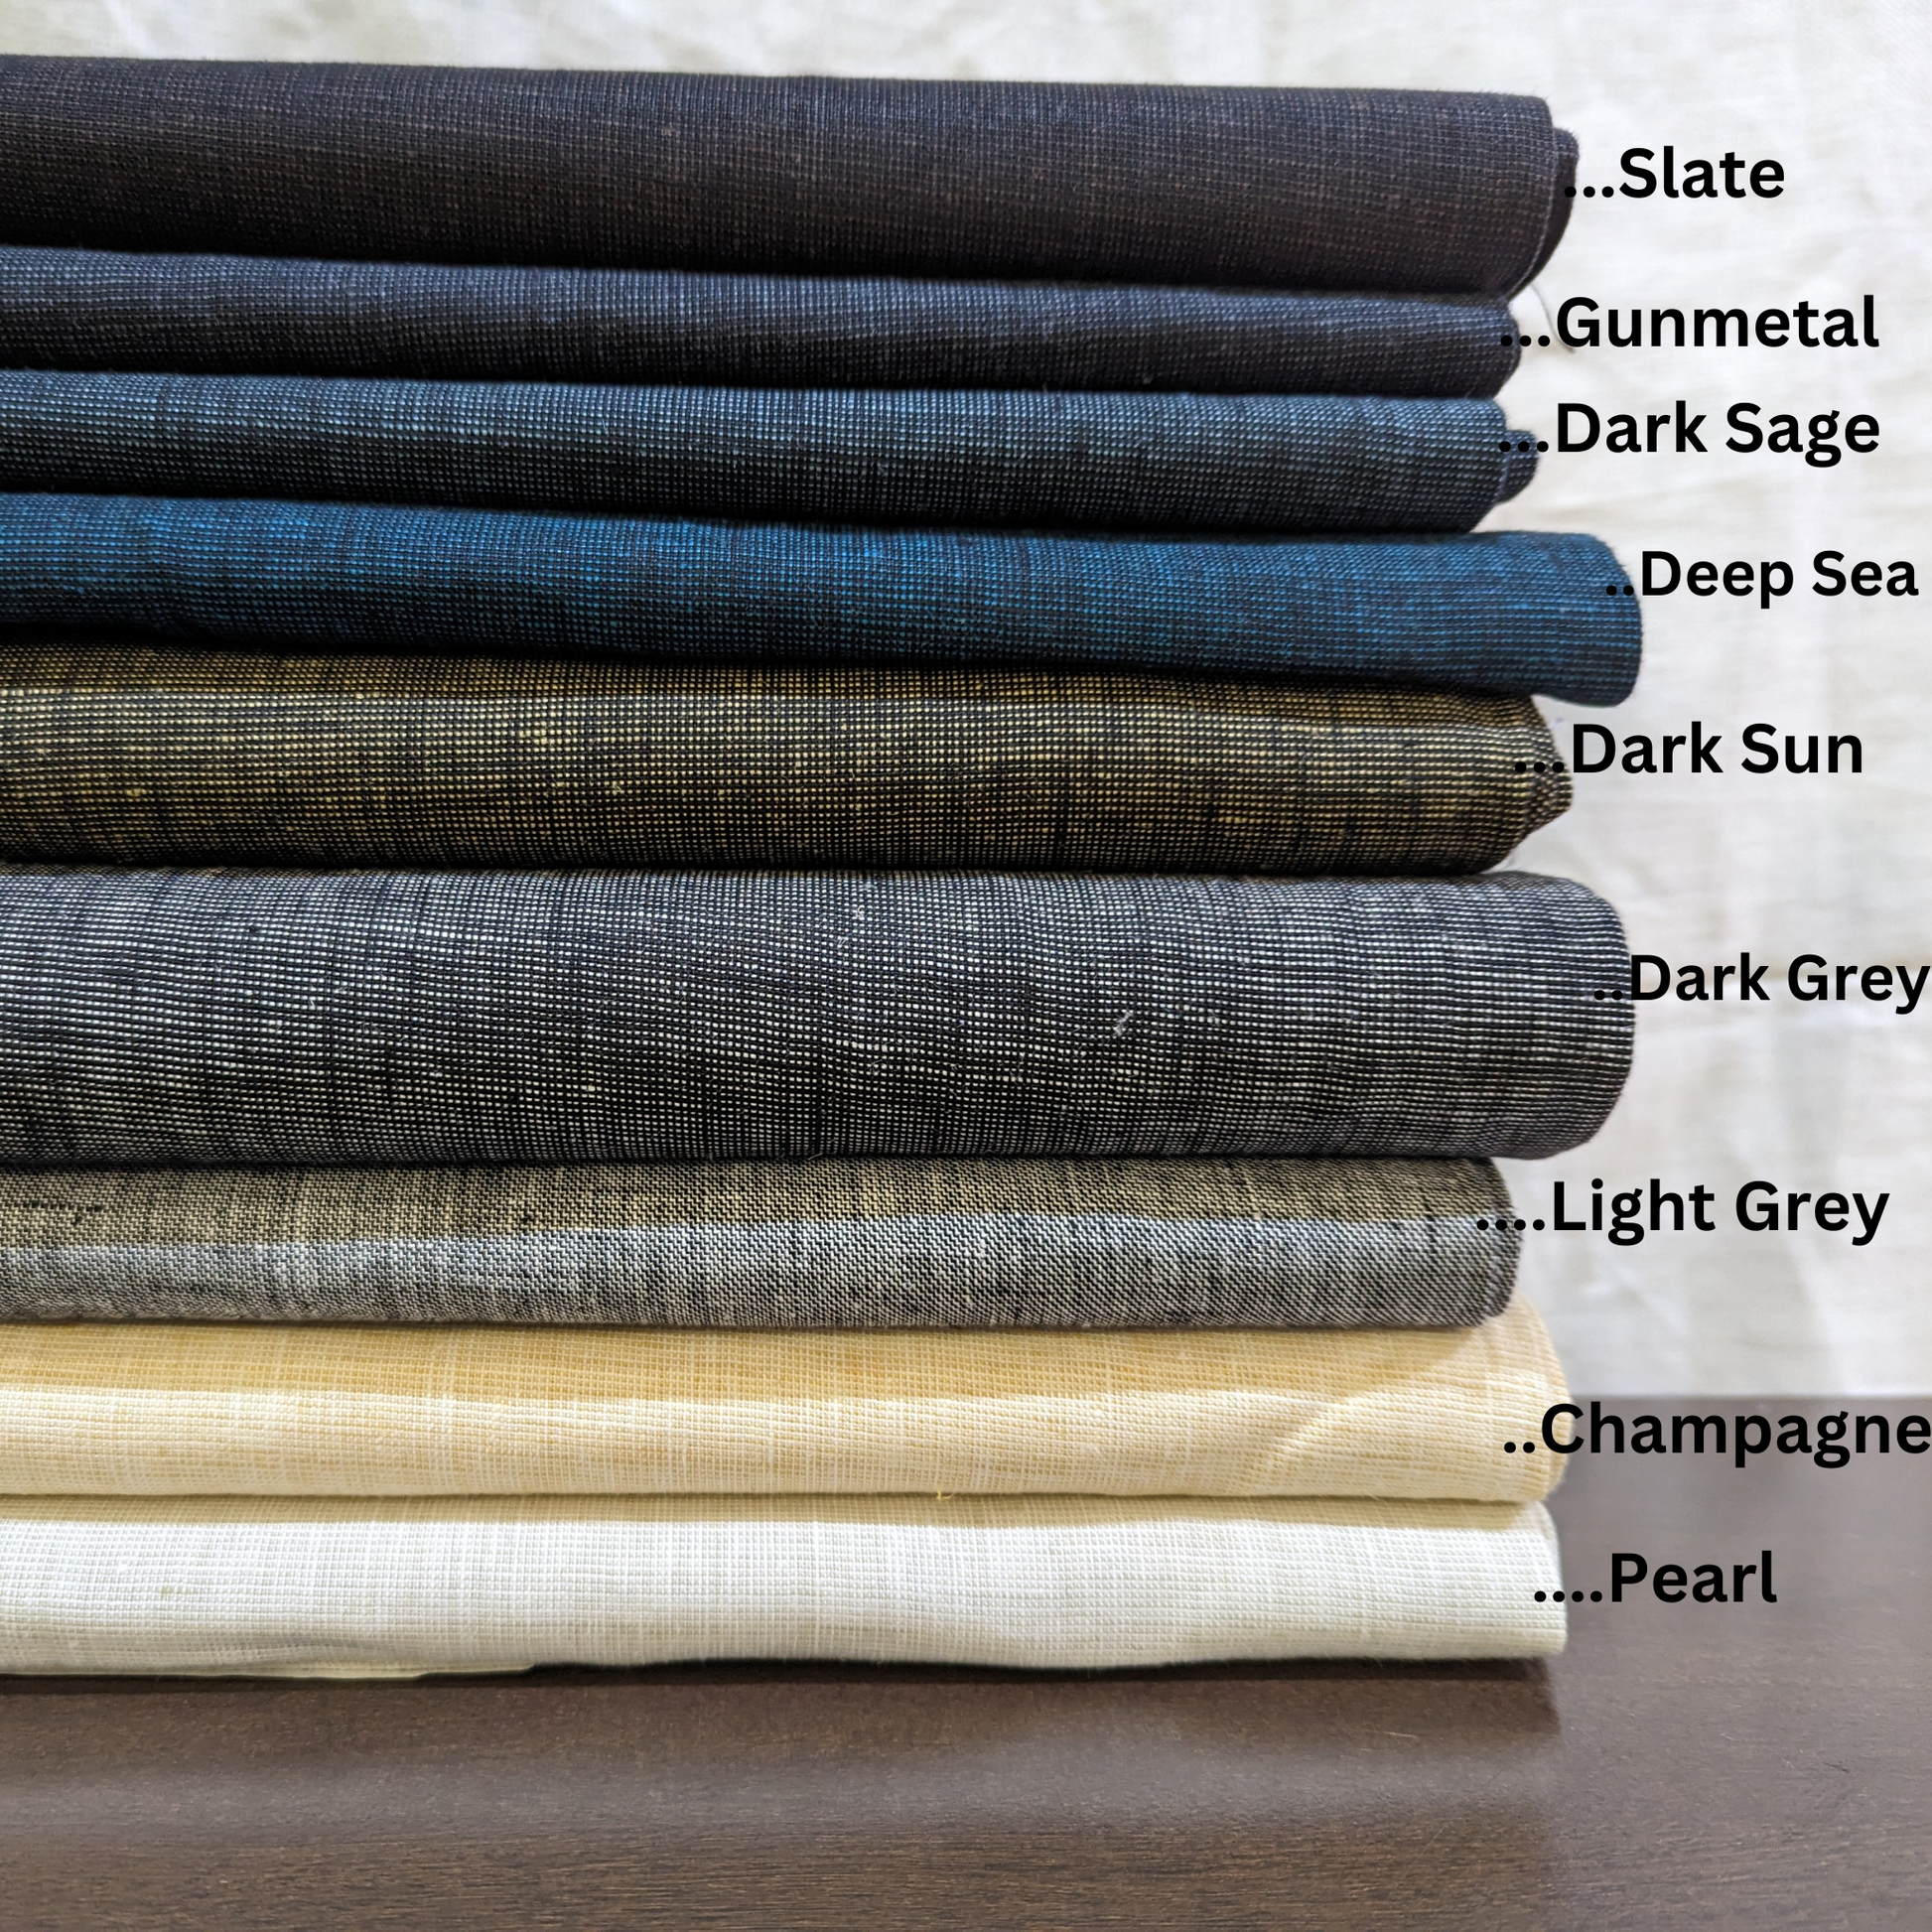 Grains Suiting: Pure Linen Fabric, Used for Suits, Trousers, Tableware, Upholstery - OrganoLinen